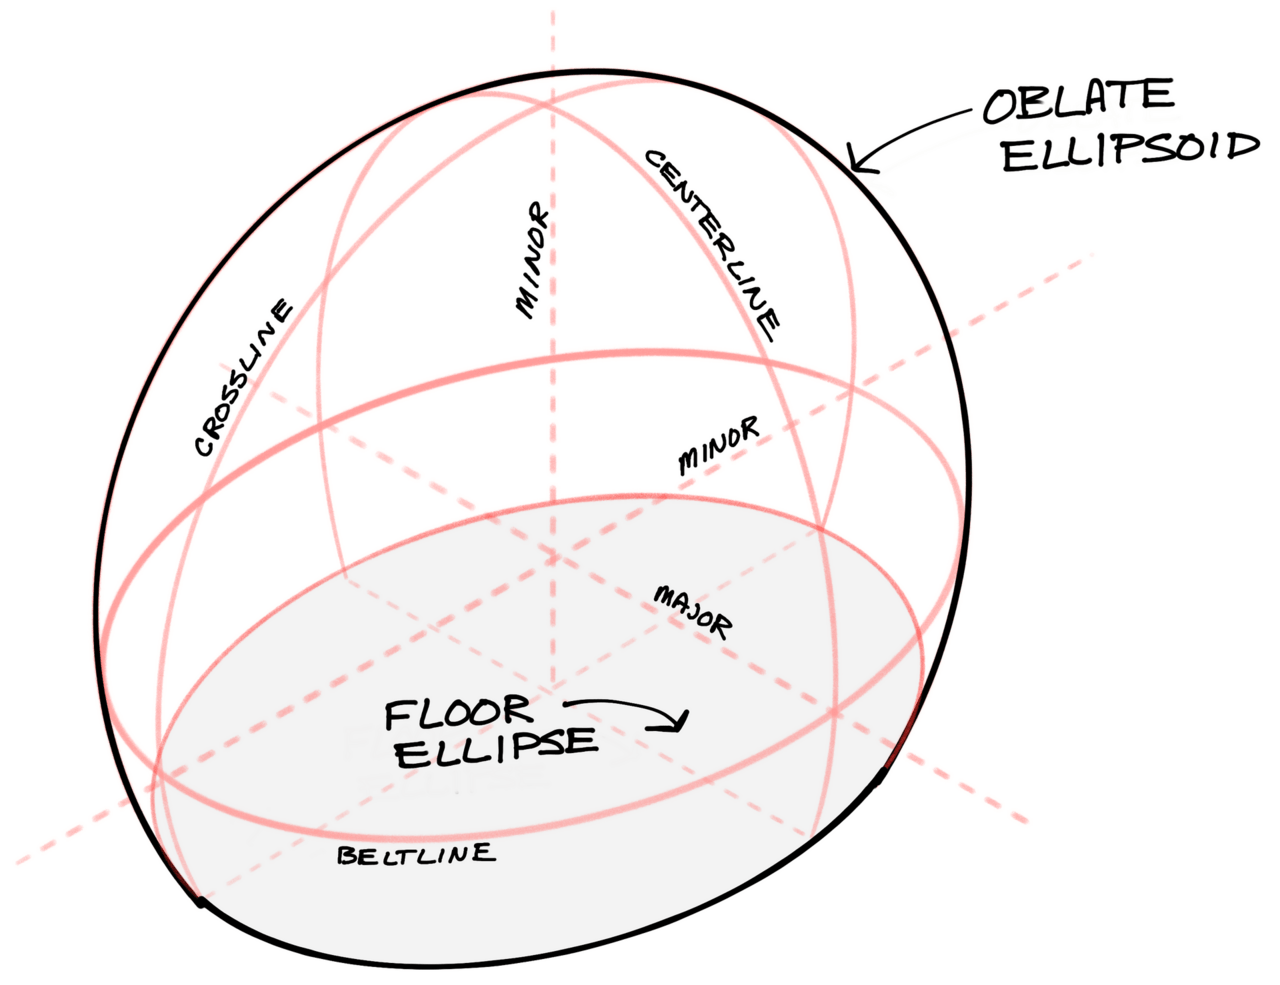 A sketch of a horizontal oblate ellipsoid